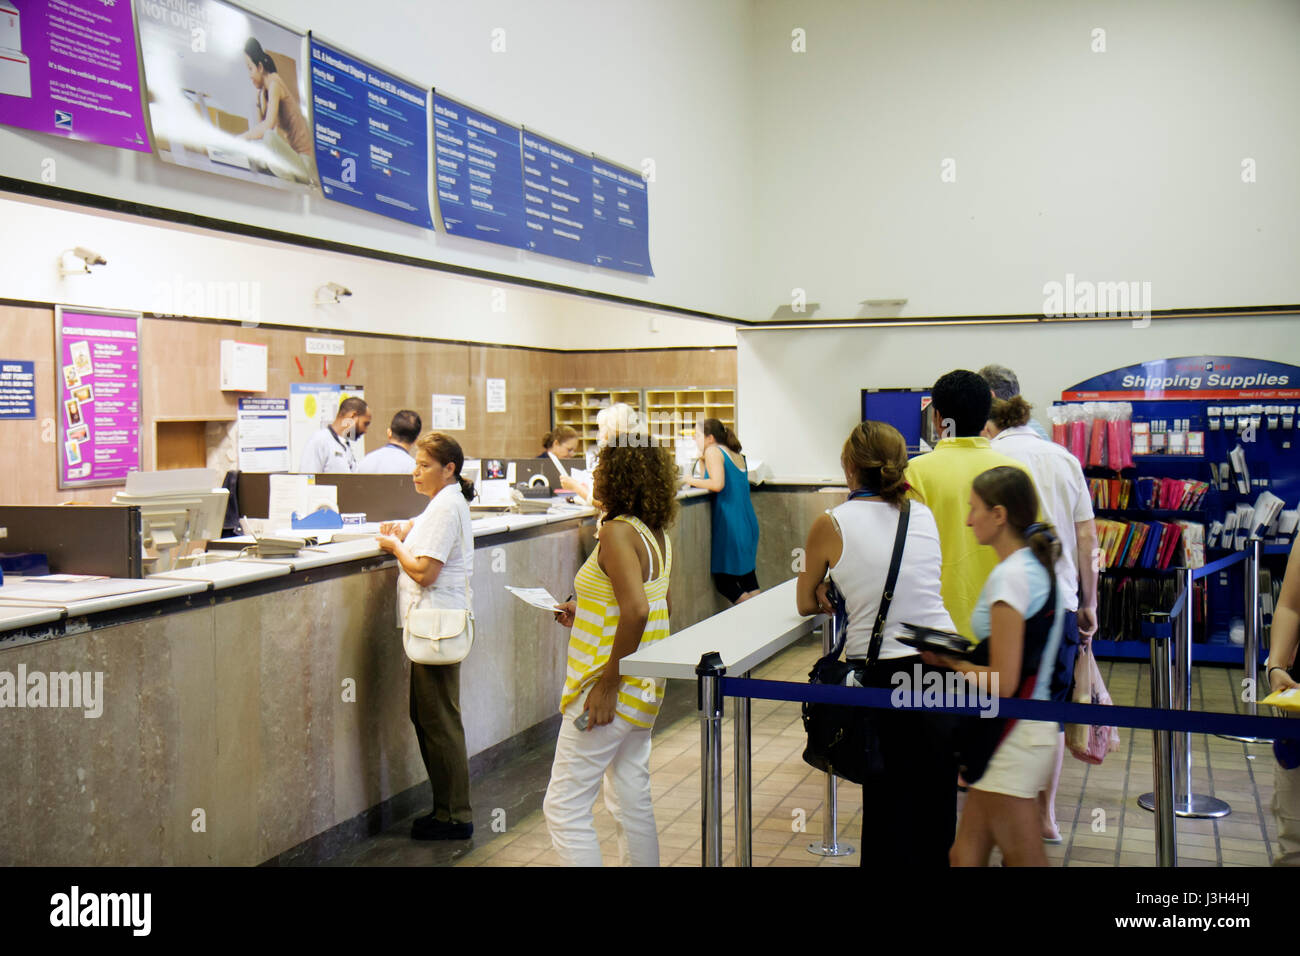 Miami Beach Florida,USPS United States Postal Service post office inside interior,counter customers US mail line queue wait waiting, Stock Photo